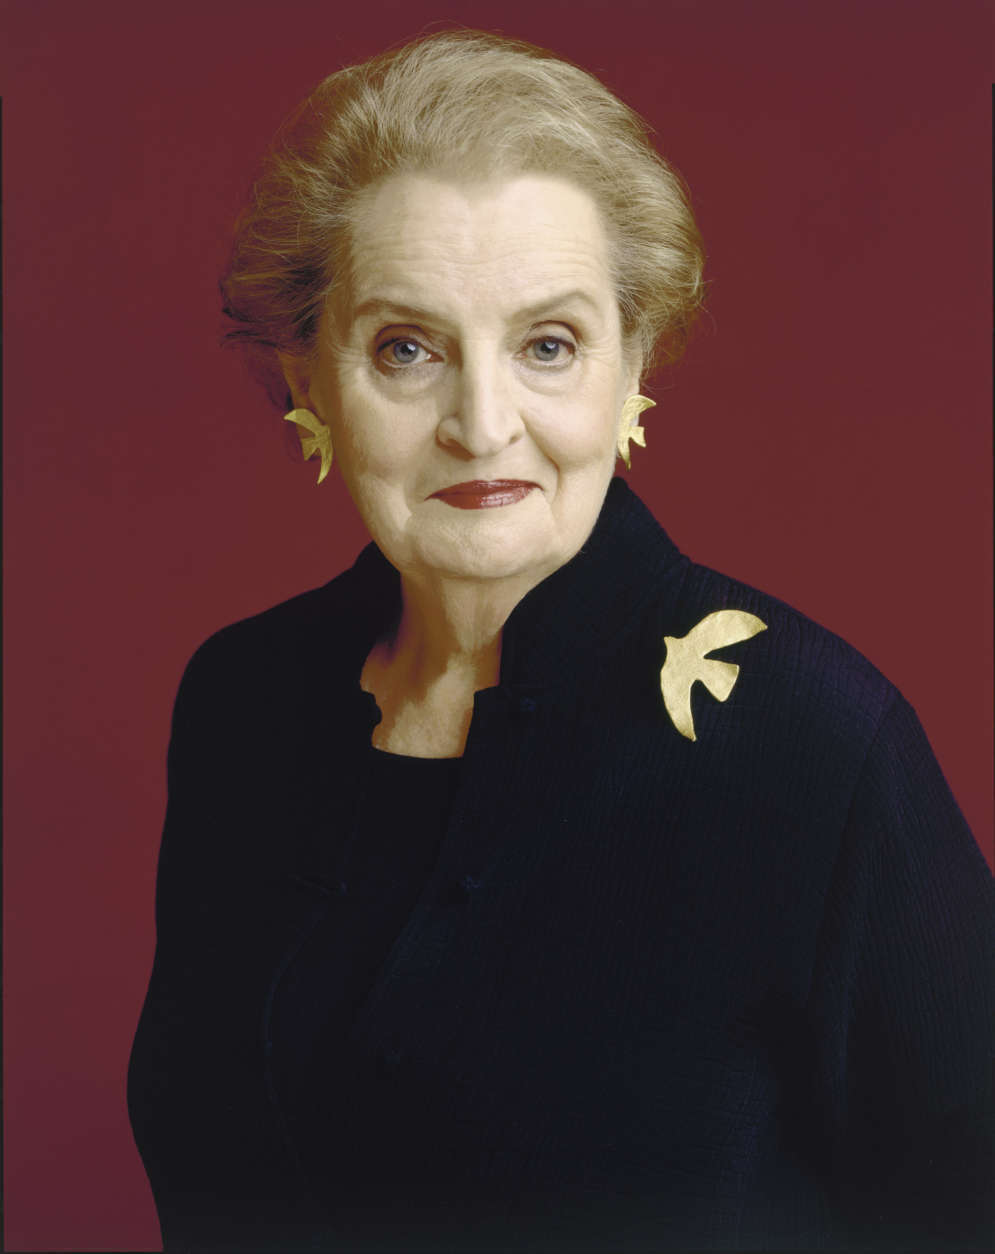 Timothy Greenfield-Sanders created this portrait of Madeline Albright using inkjet print in 2005. (Courtesy National Portrait Gallery)